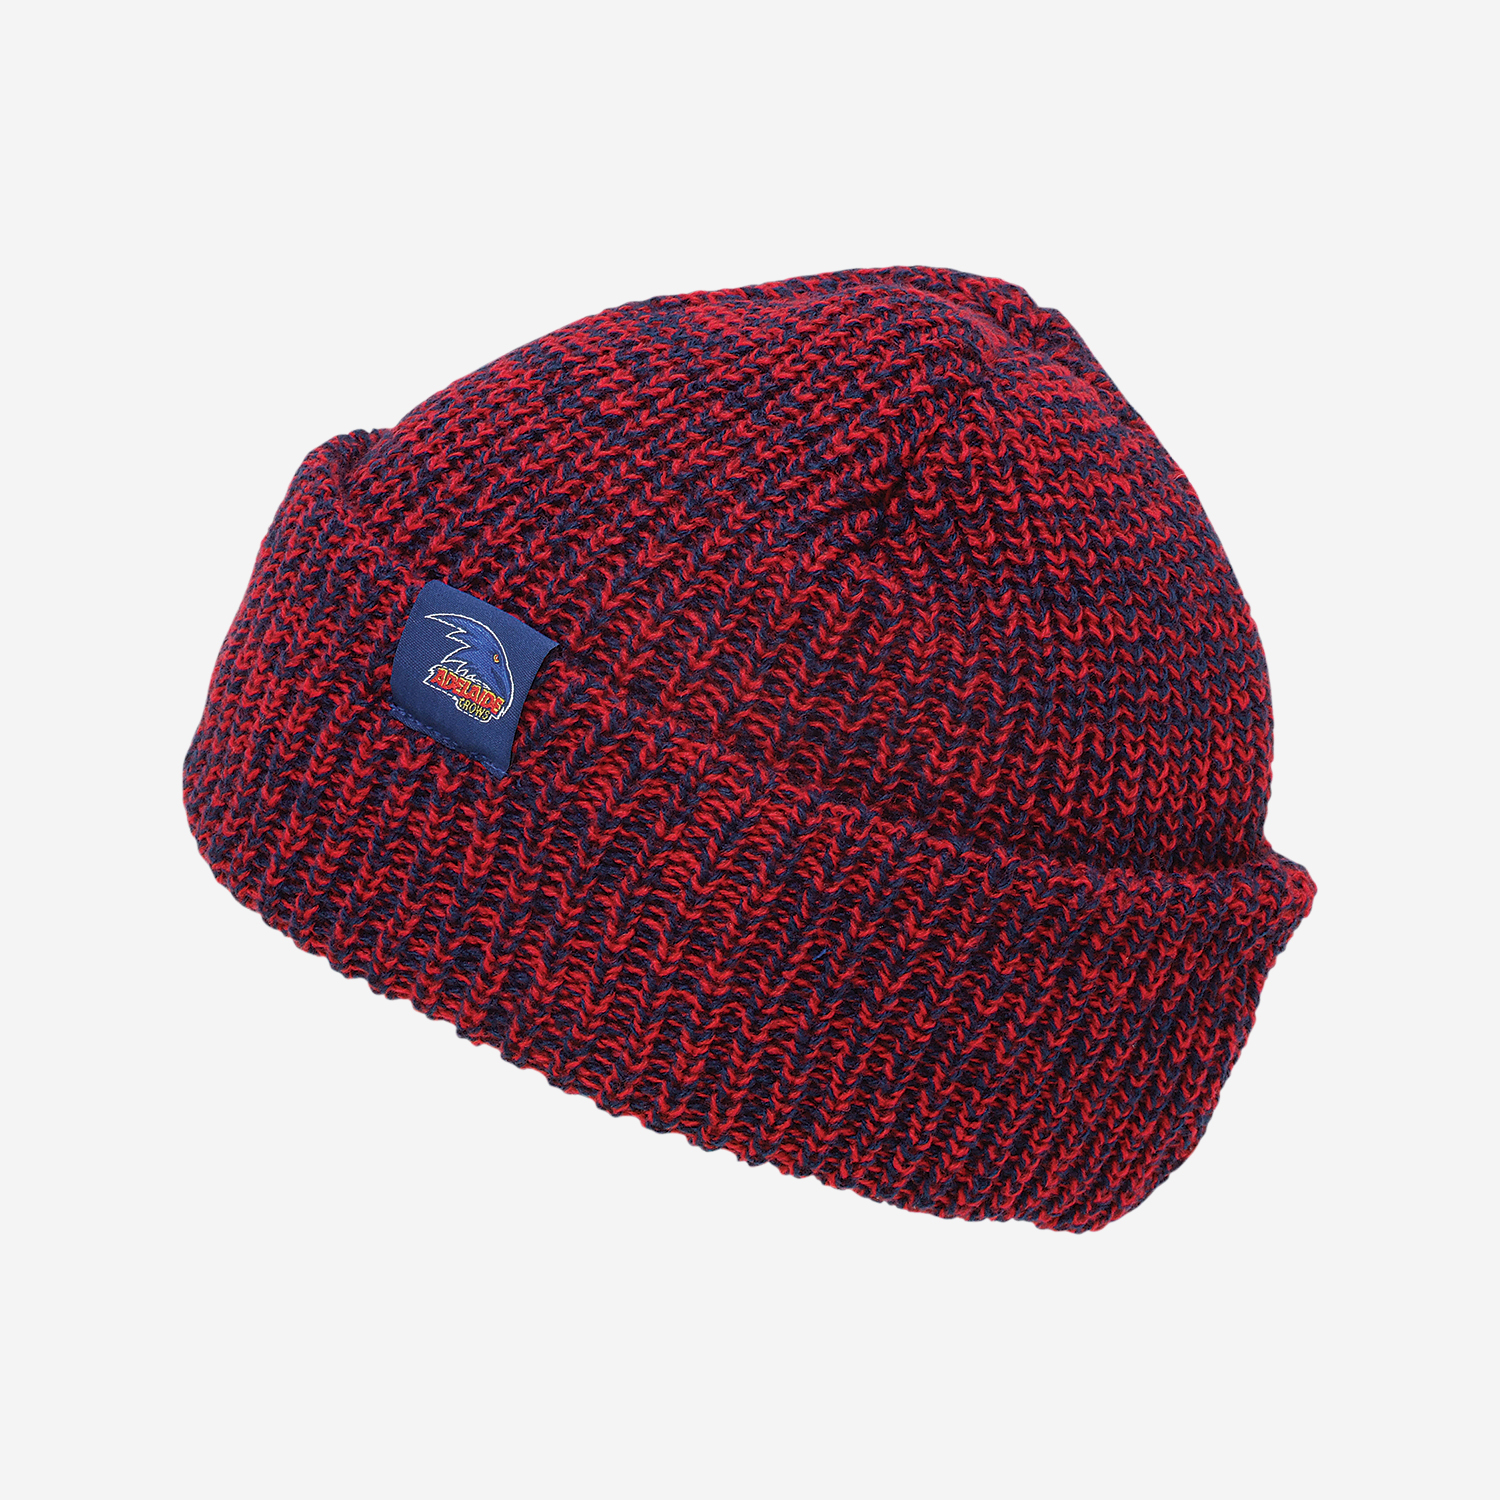 ADELAIDE CROWS AFL SLOUCH BEANIE